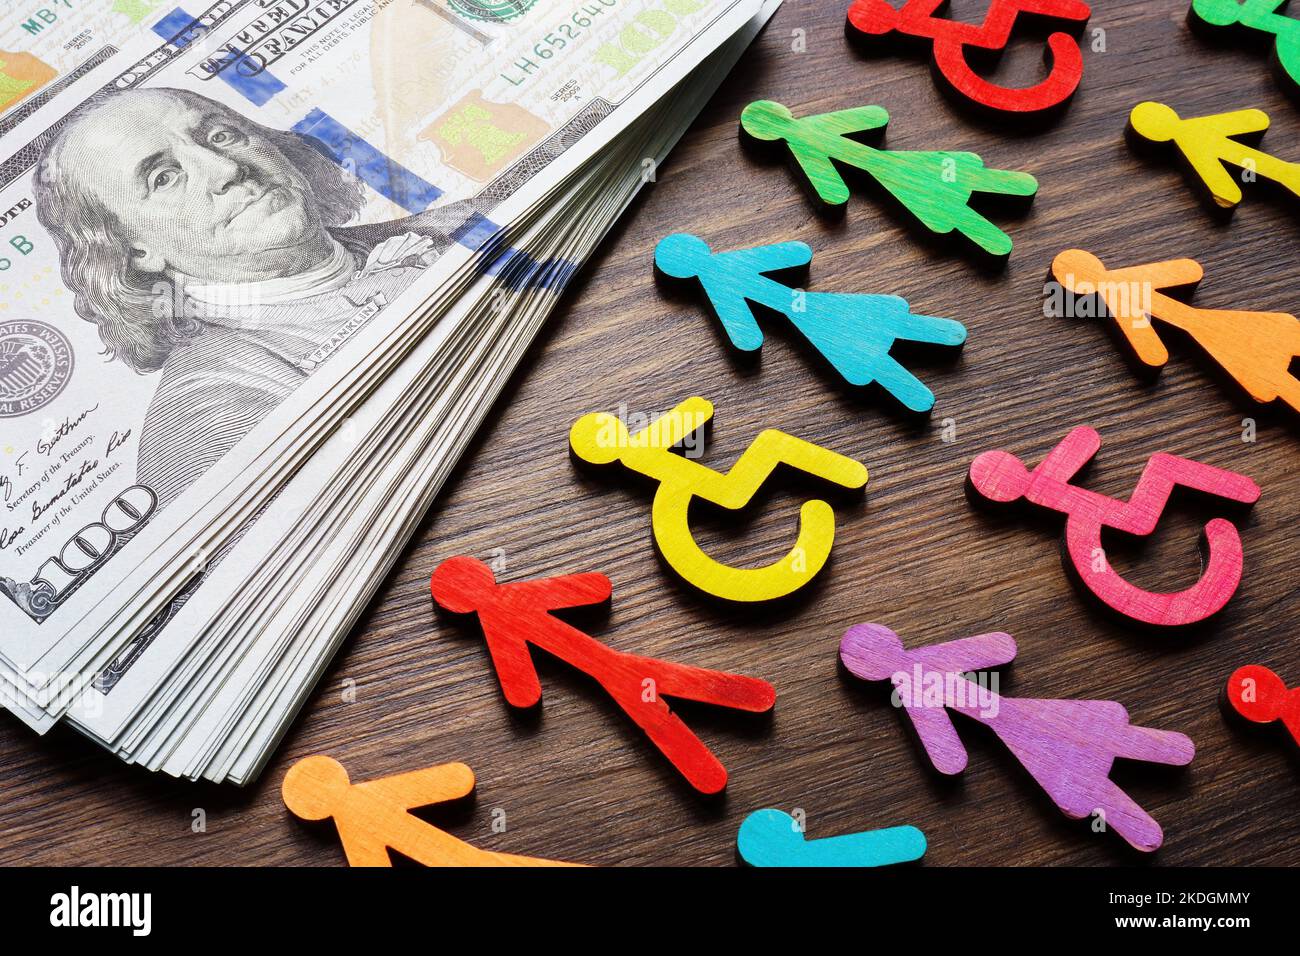 Colorful figures and money. Income inequality and wage gap concept. Stock Photo